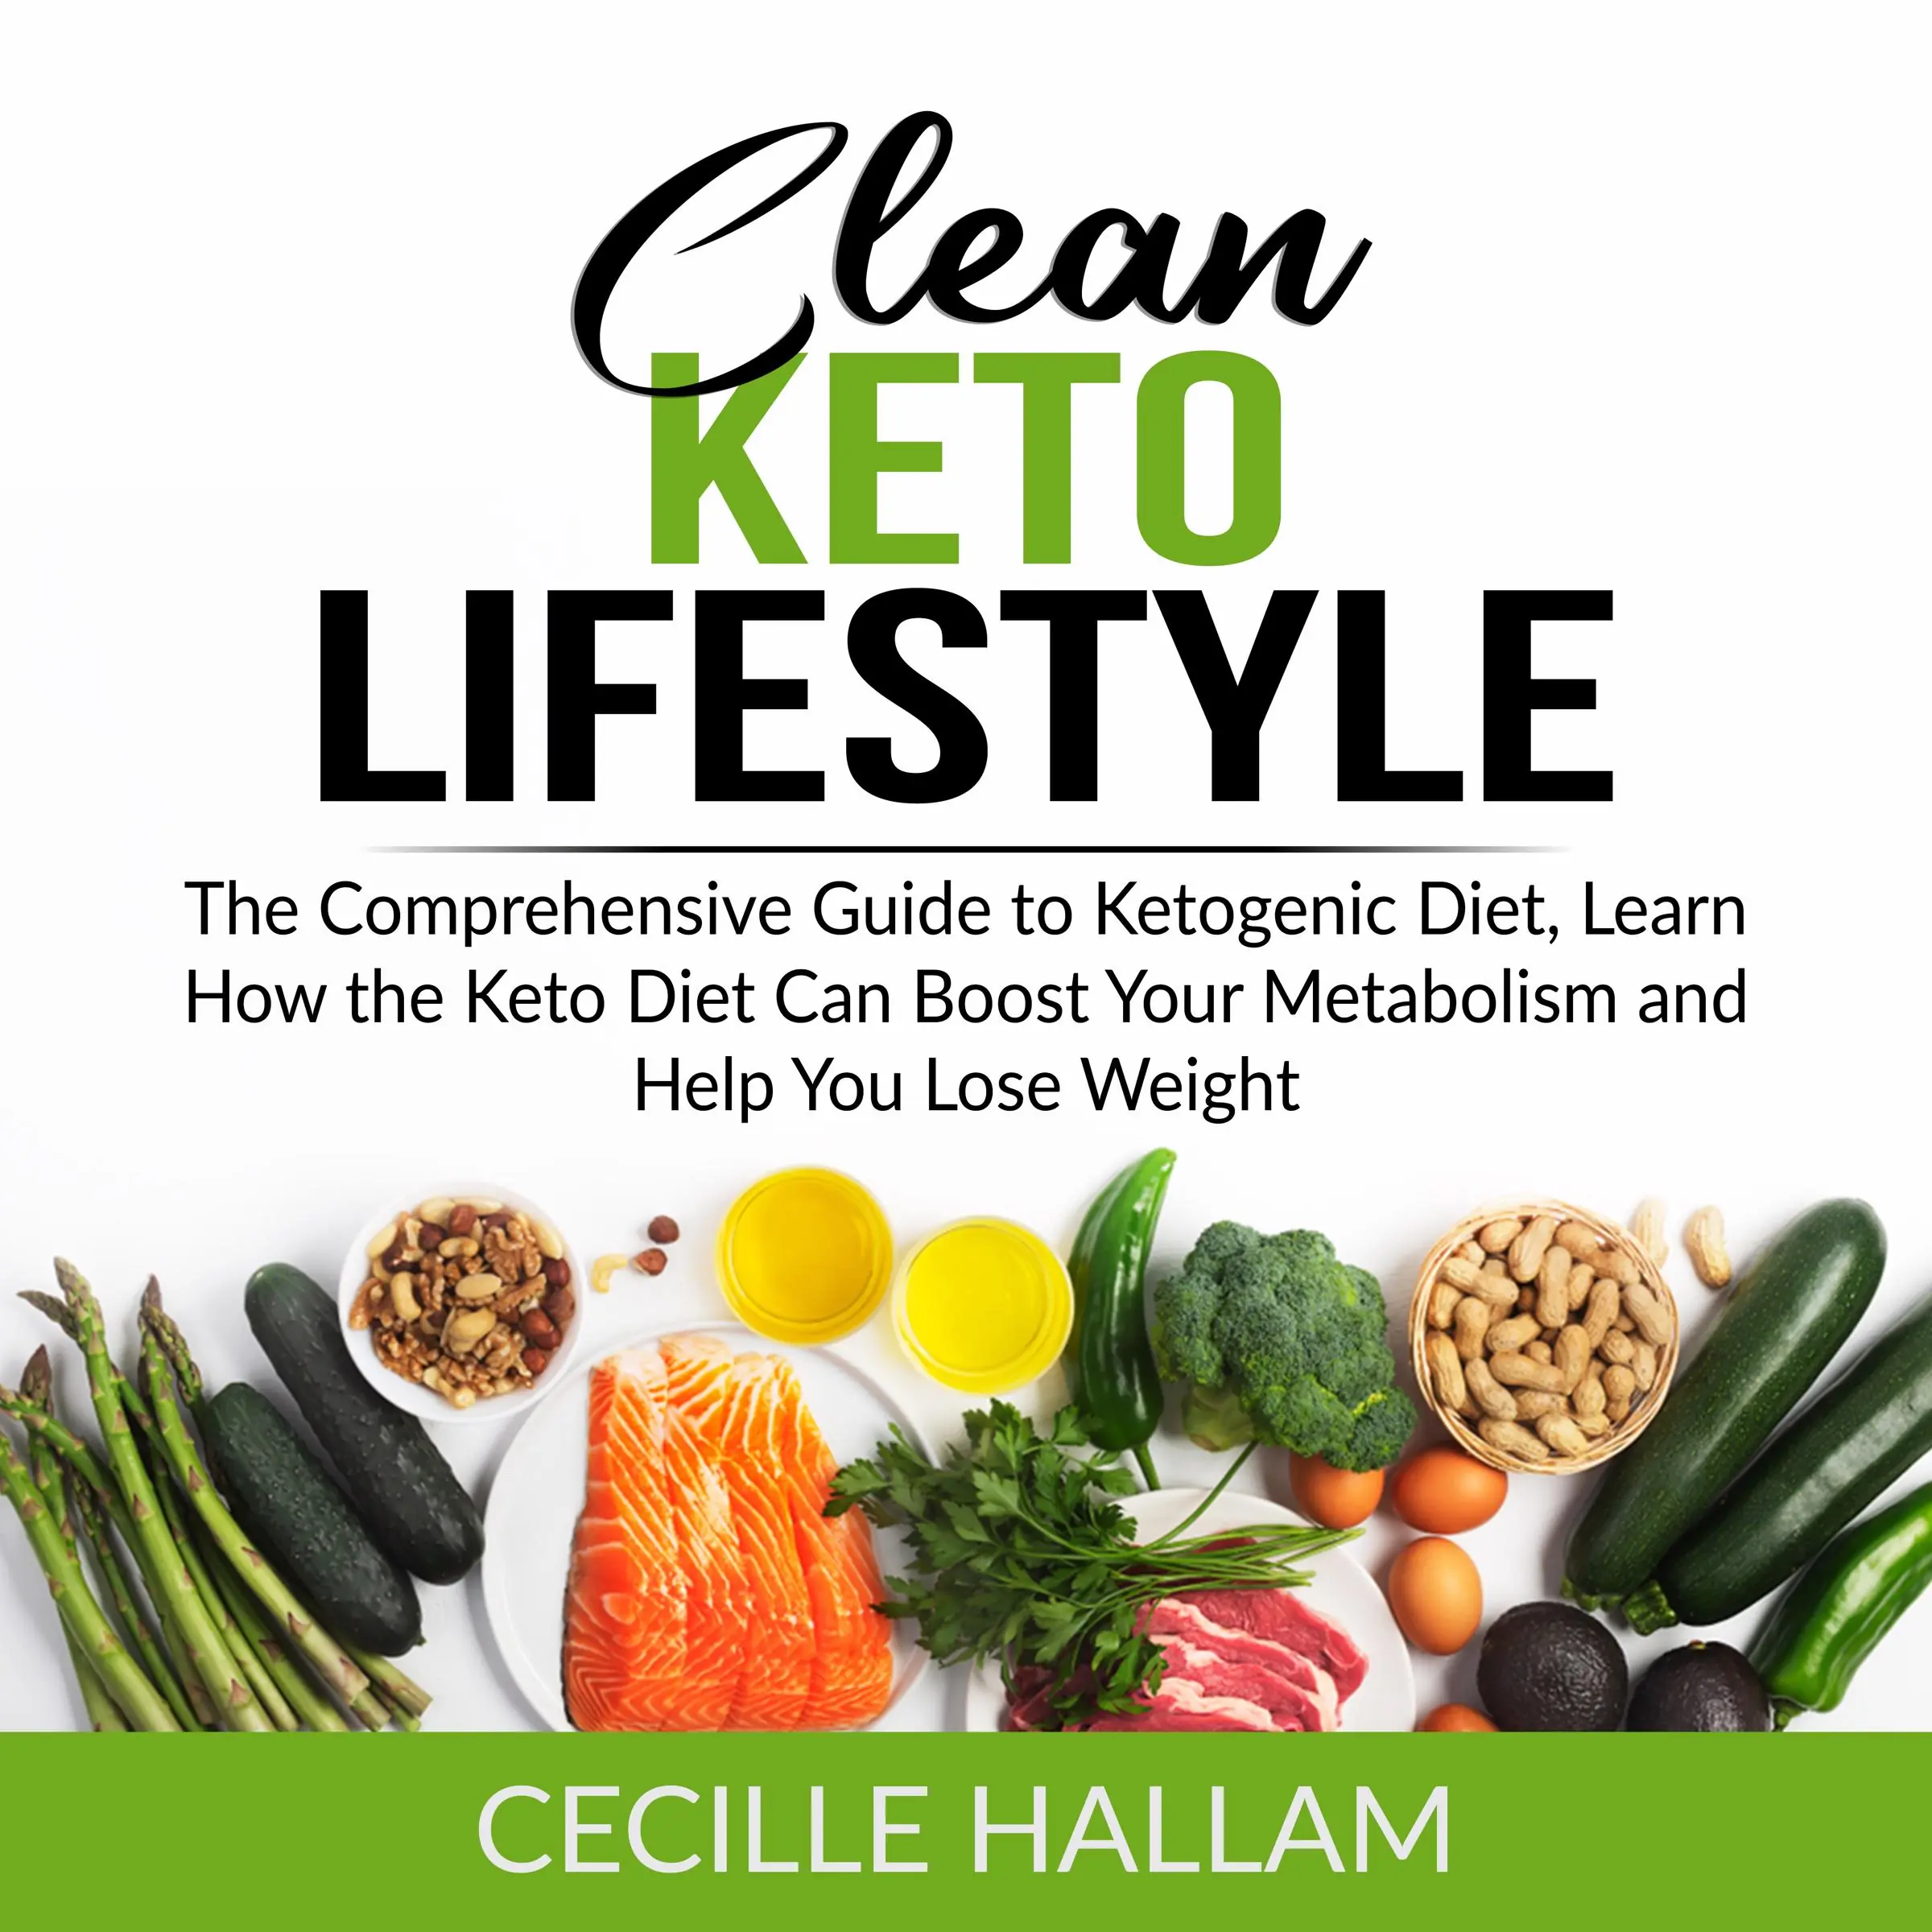 Clean Keto Lifestyle: The Comprehensive Guide to Ketogenic Diet, Learn How the Keto Diet Can Boost Your Metabolism and Help You Lose Weight Audiobook by Cecille Hallam